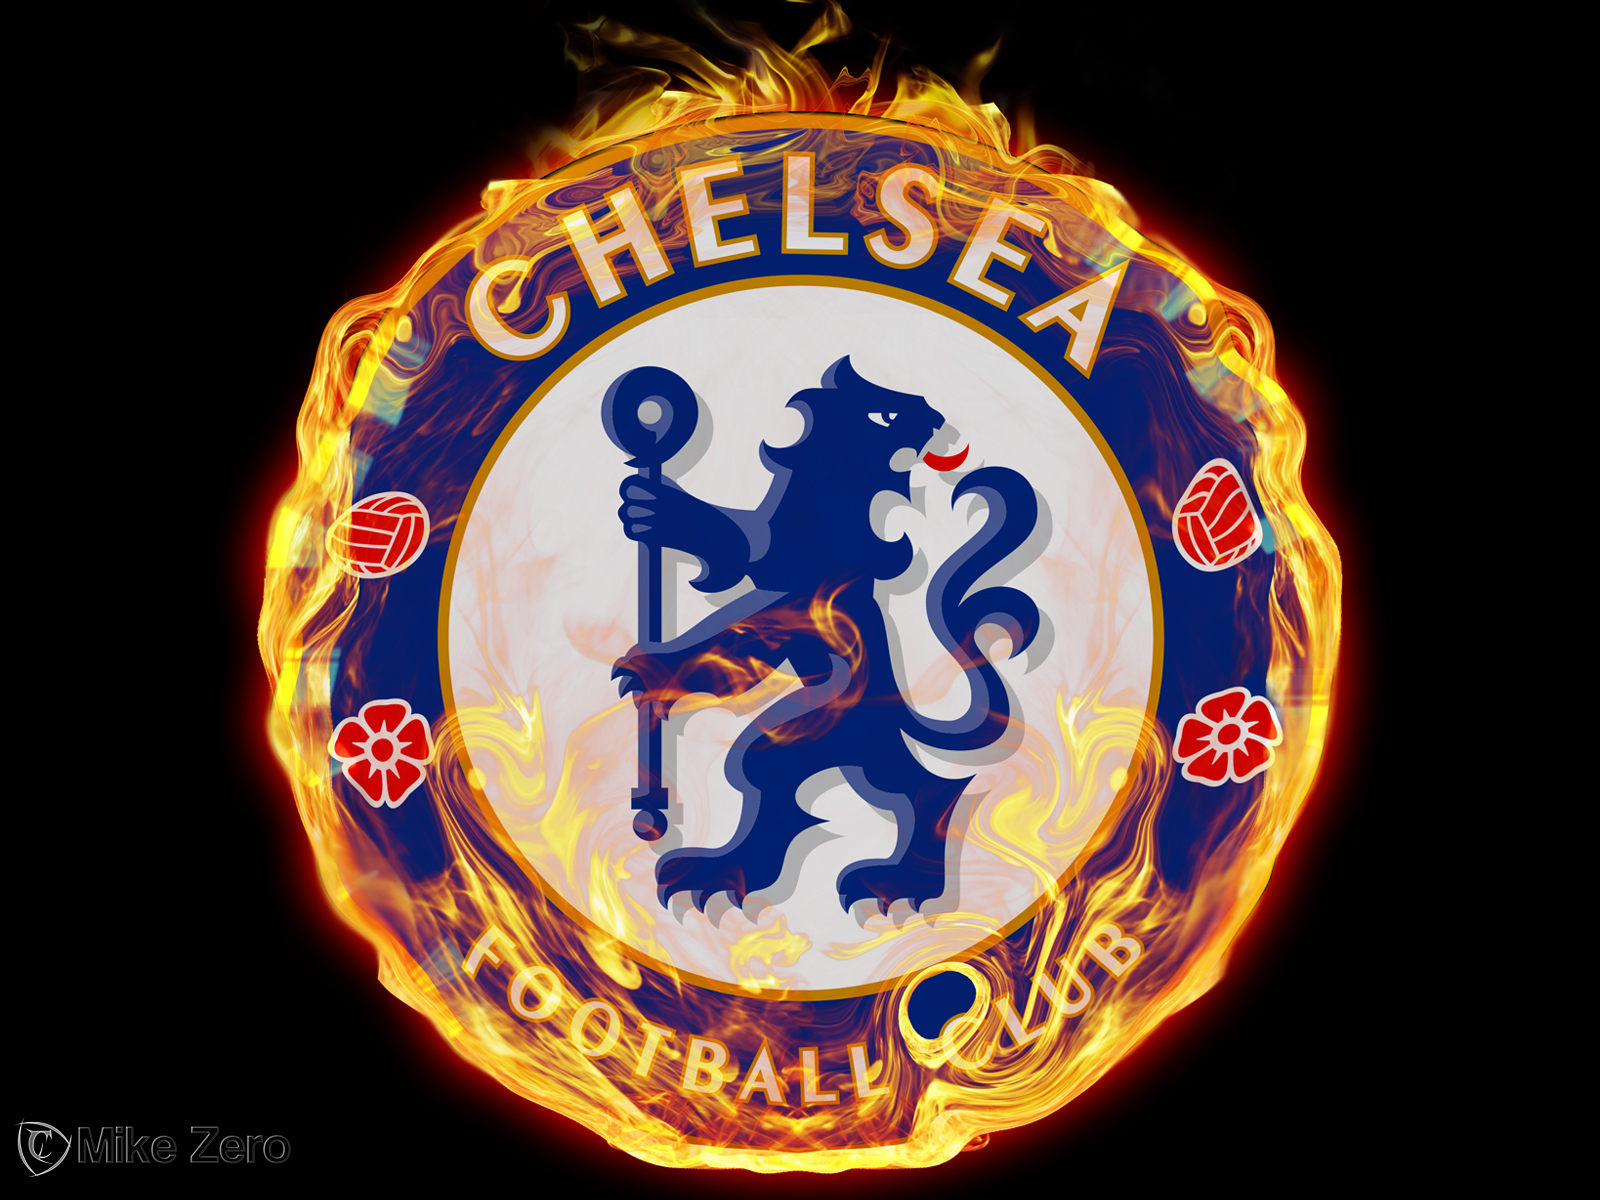 Chelsea FC Logo 2012 - 2013 - Wallpapers Pictures